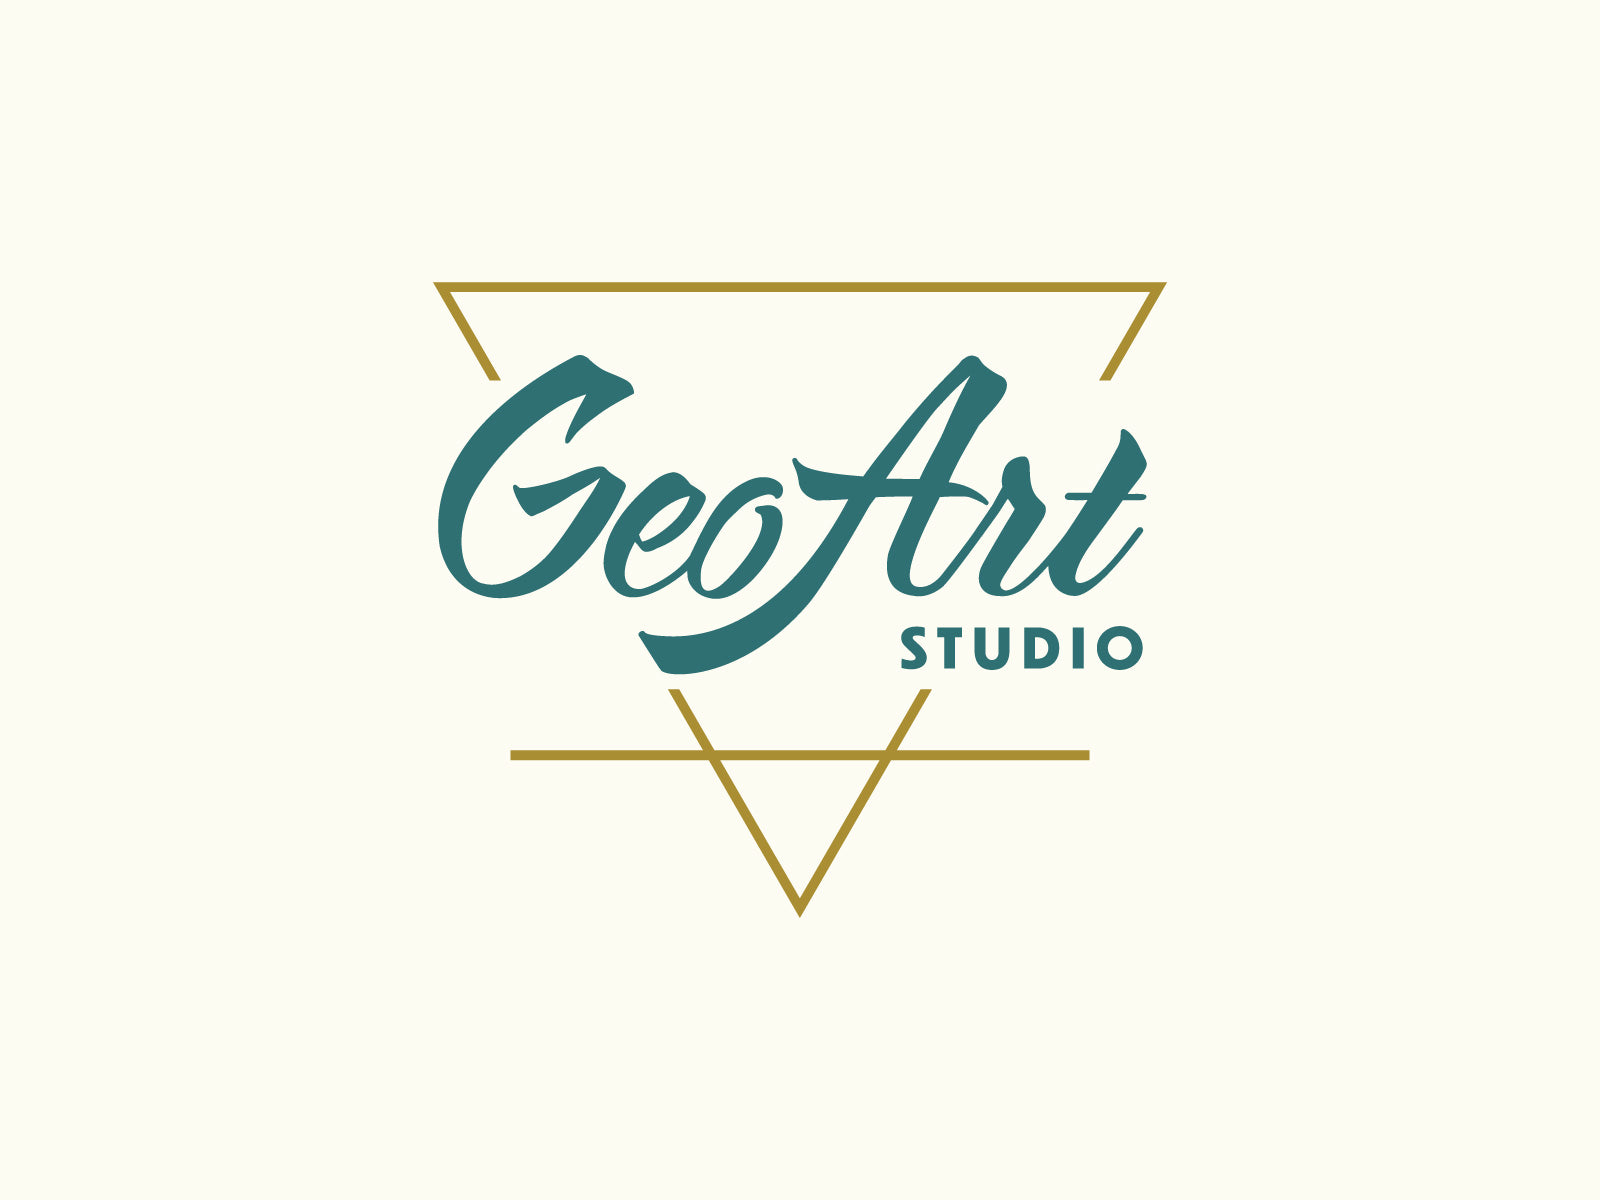 The GeoArt logo in a script font with a triangle symbol in the background